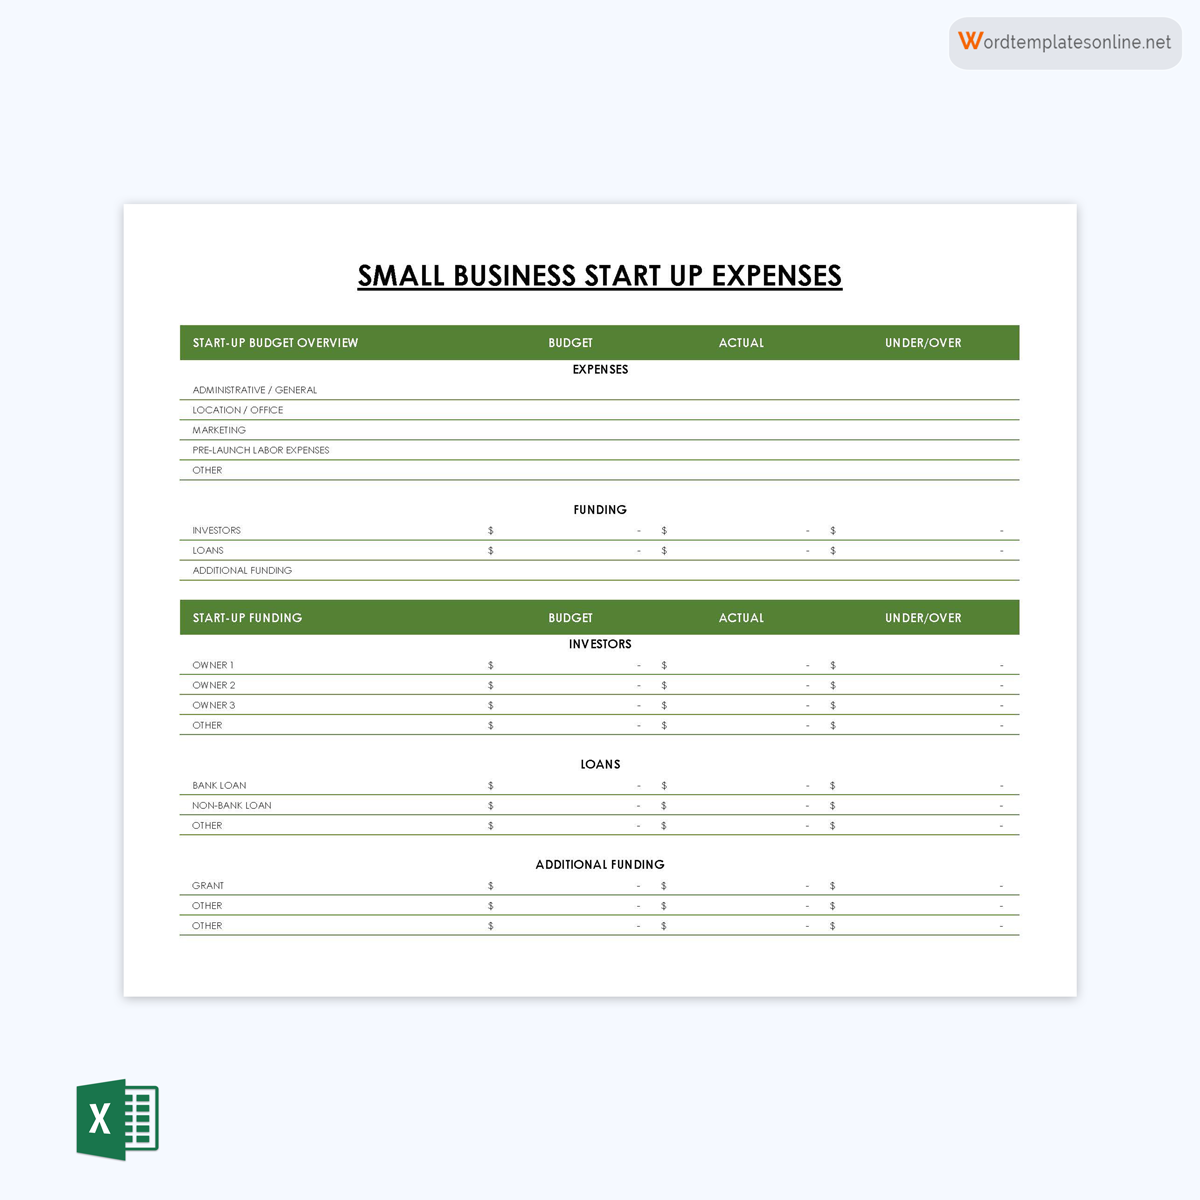 Free Printable Small Business Startup Expense Report Template as Excel Format